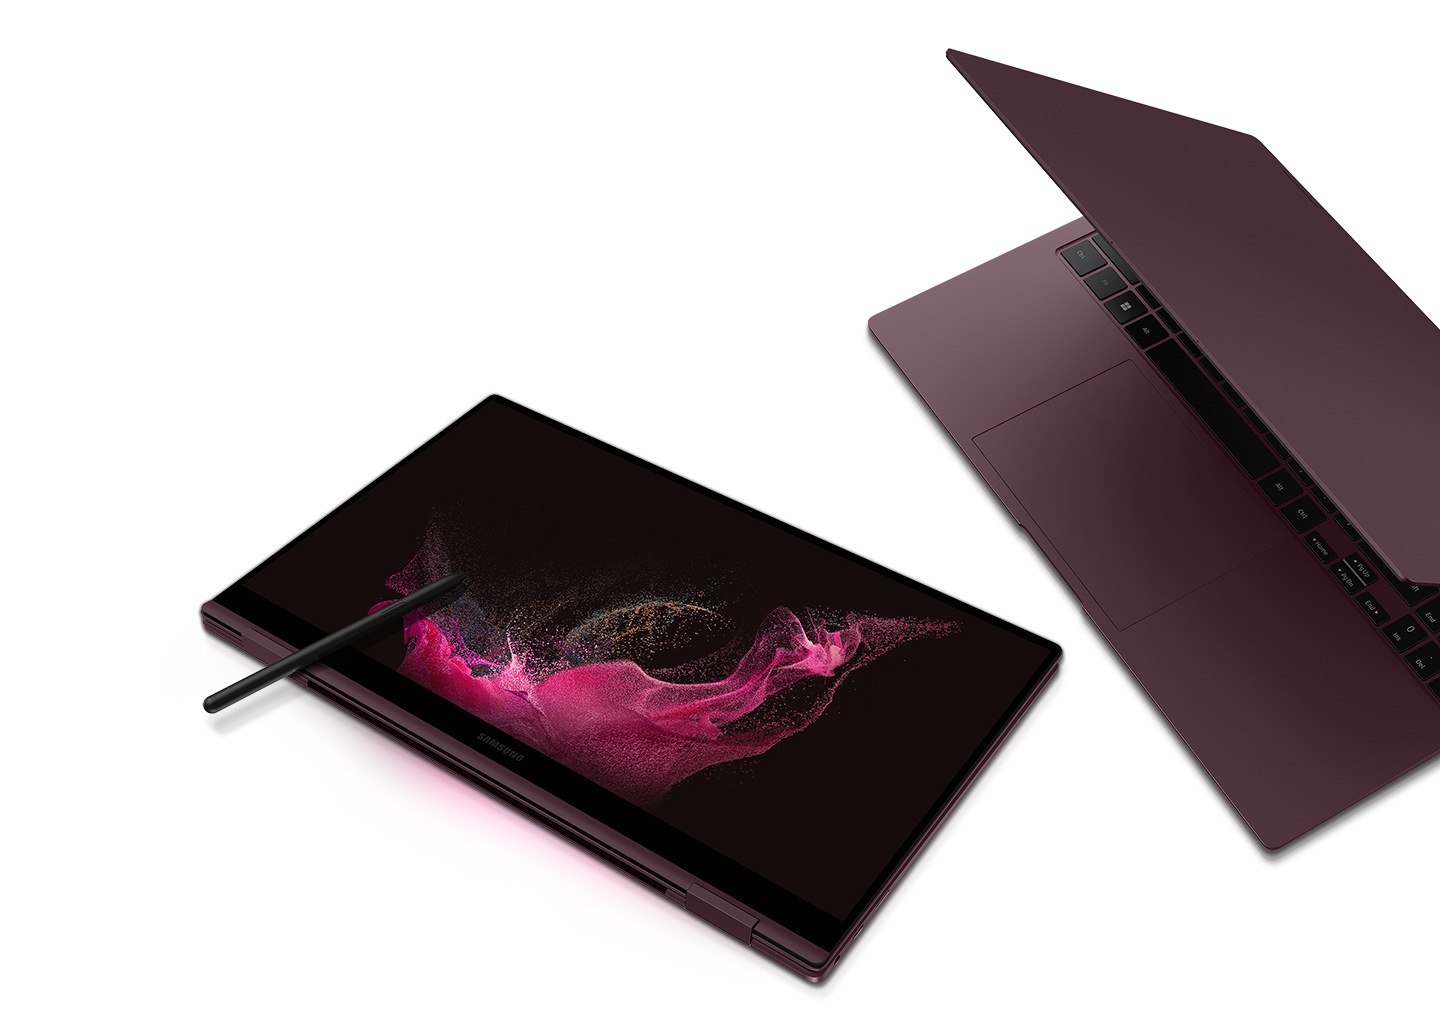 Two burgundy-colored Galaxy Book2 Pro 360 devices are next to each other. The one on the left is folded like a tablet and an S Pen is placed on the screen that has a pink wavy wallpaper. The one on the right is half open and is facing towards the Galaxy Book2 Pro 360 on the left.